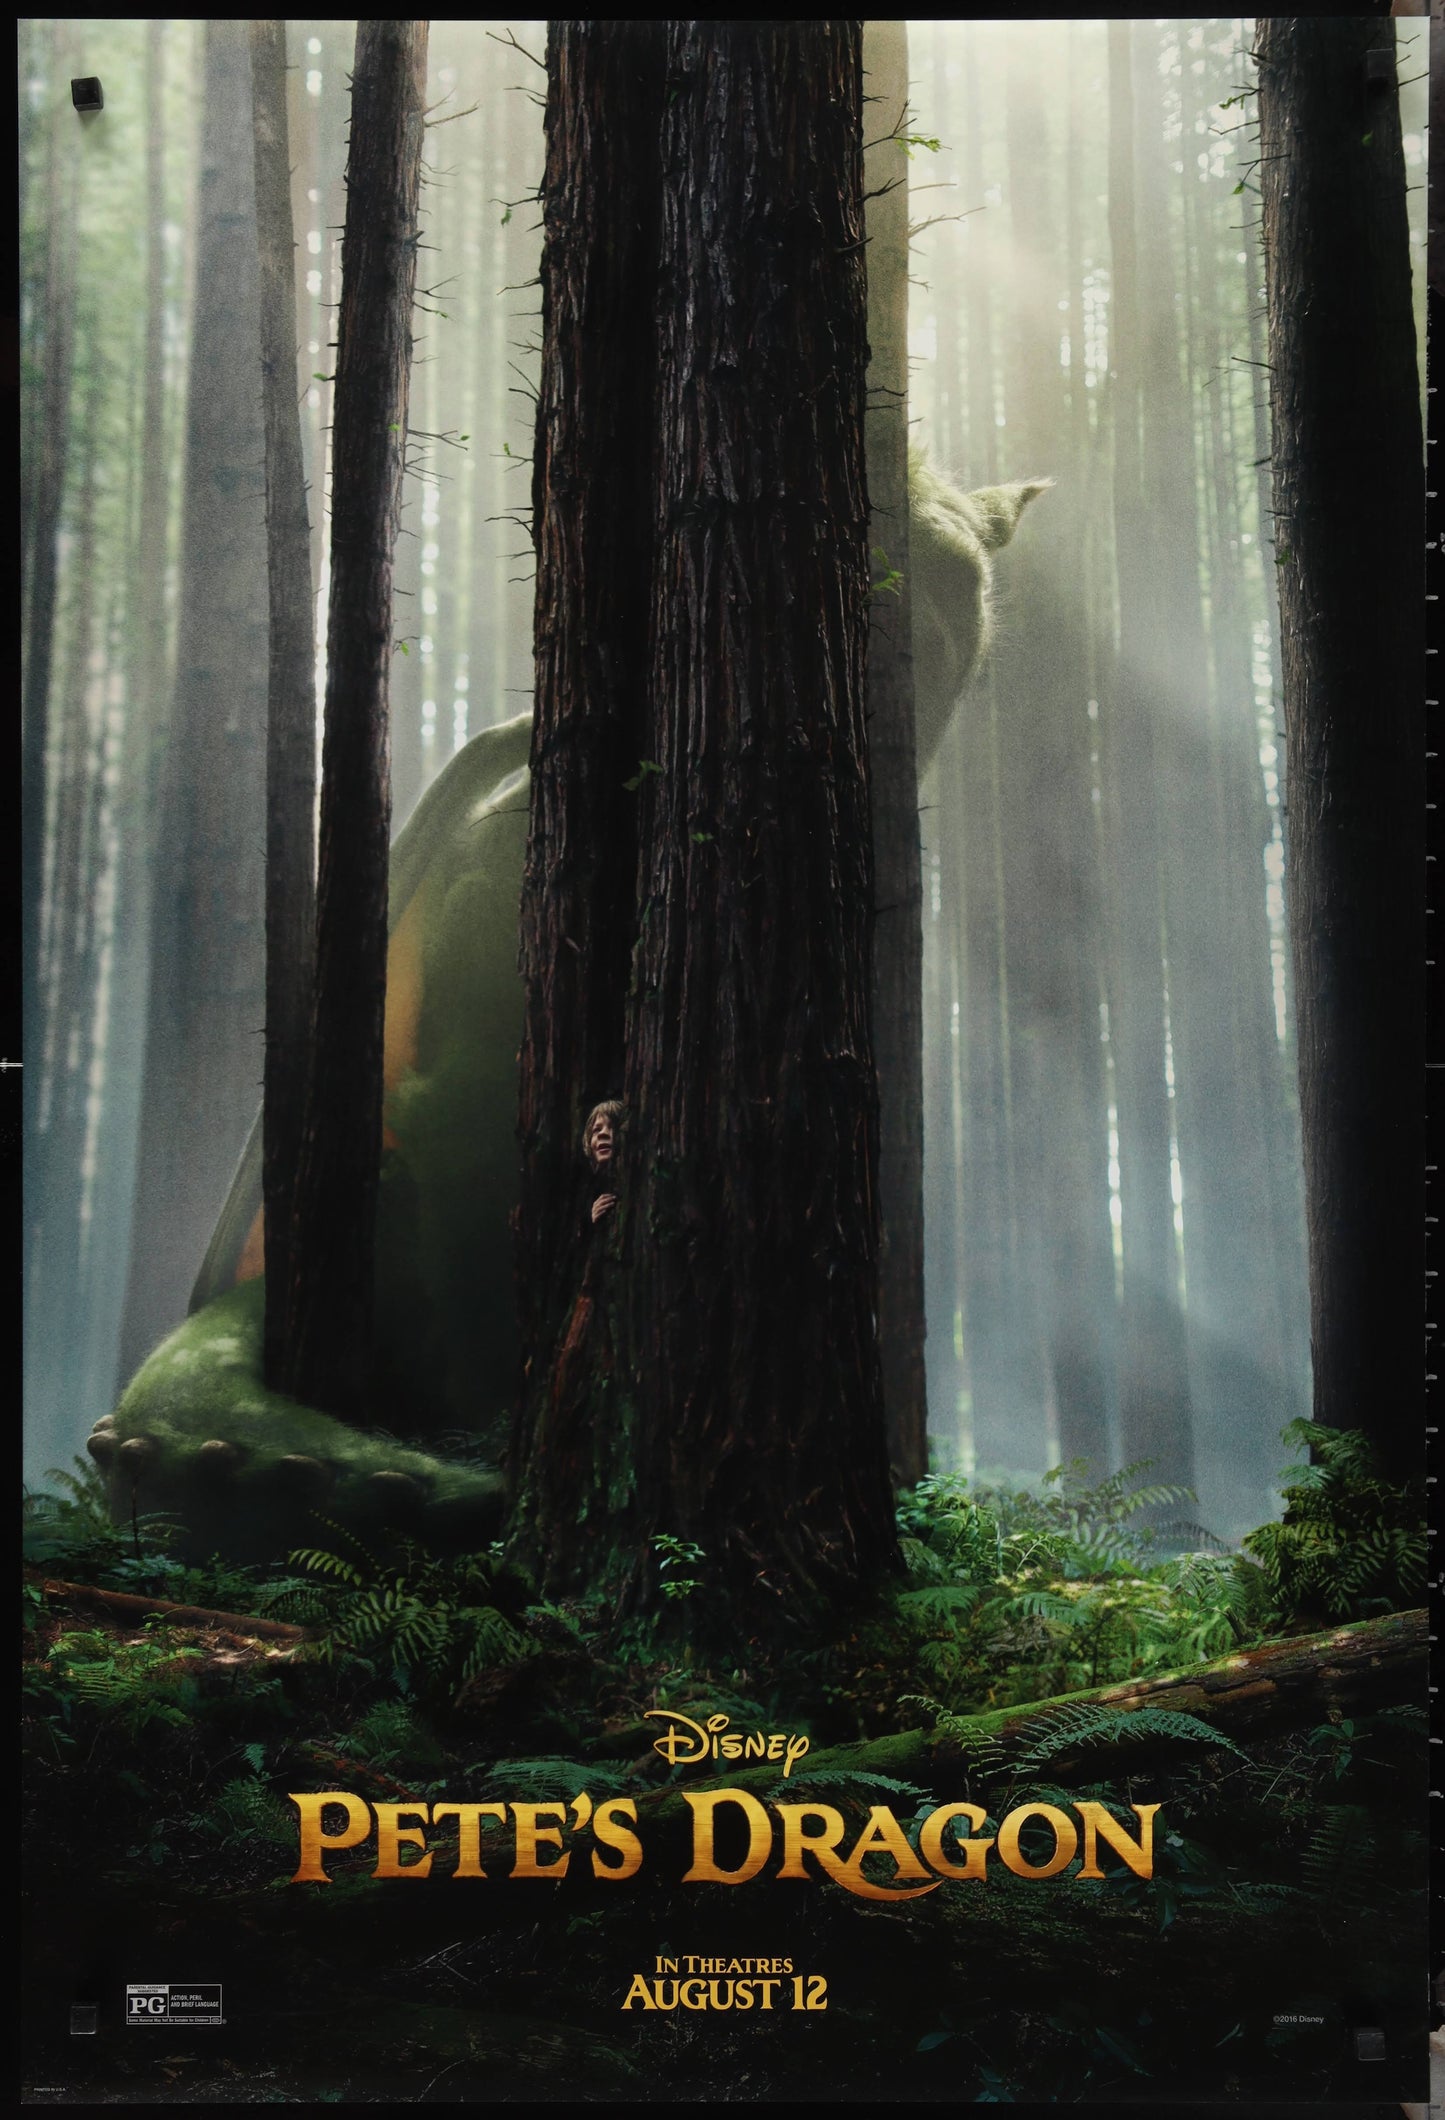 Pete's Dragon US One Sheet Teaser Style (2016) - ORIGINAL RELEASE - posterpalace.com